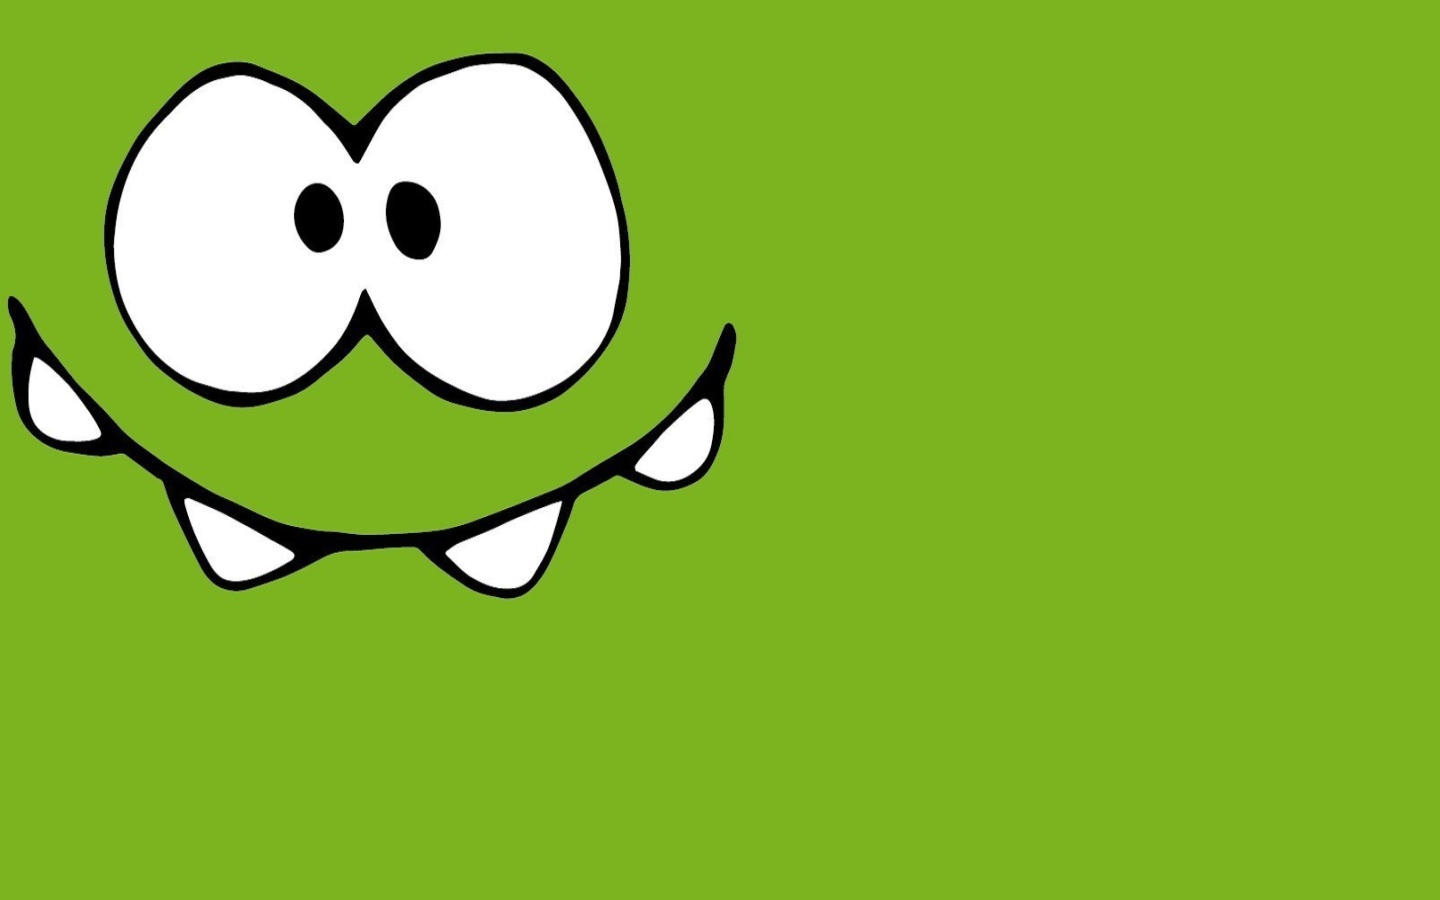 Om Nom from game Cut the Rope wallpaper 1440x900